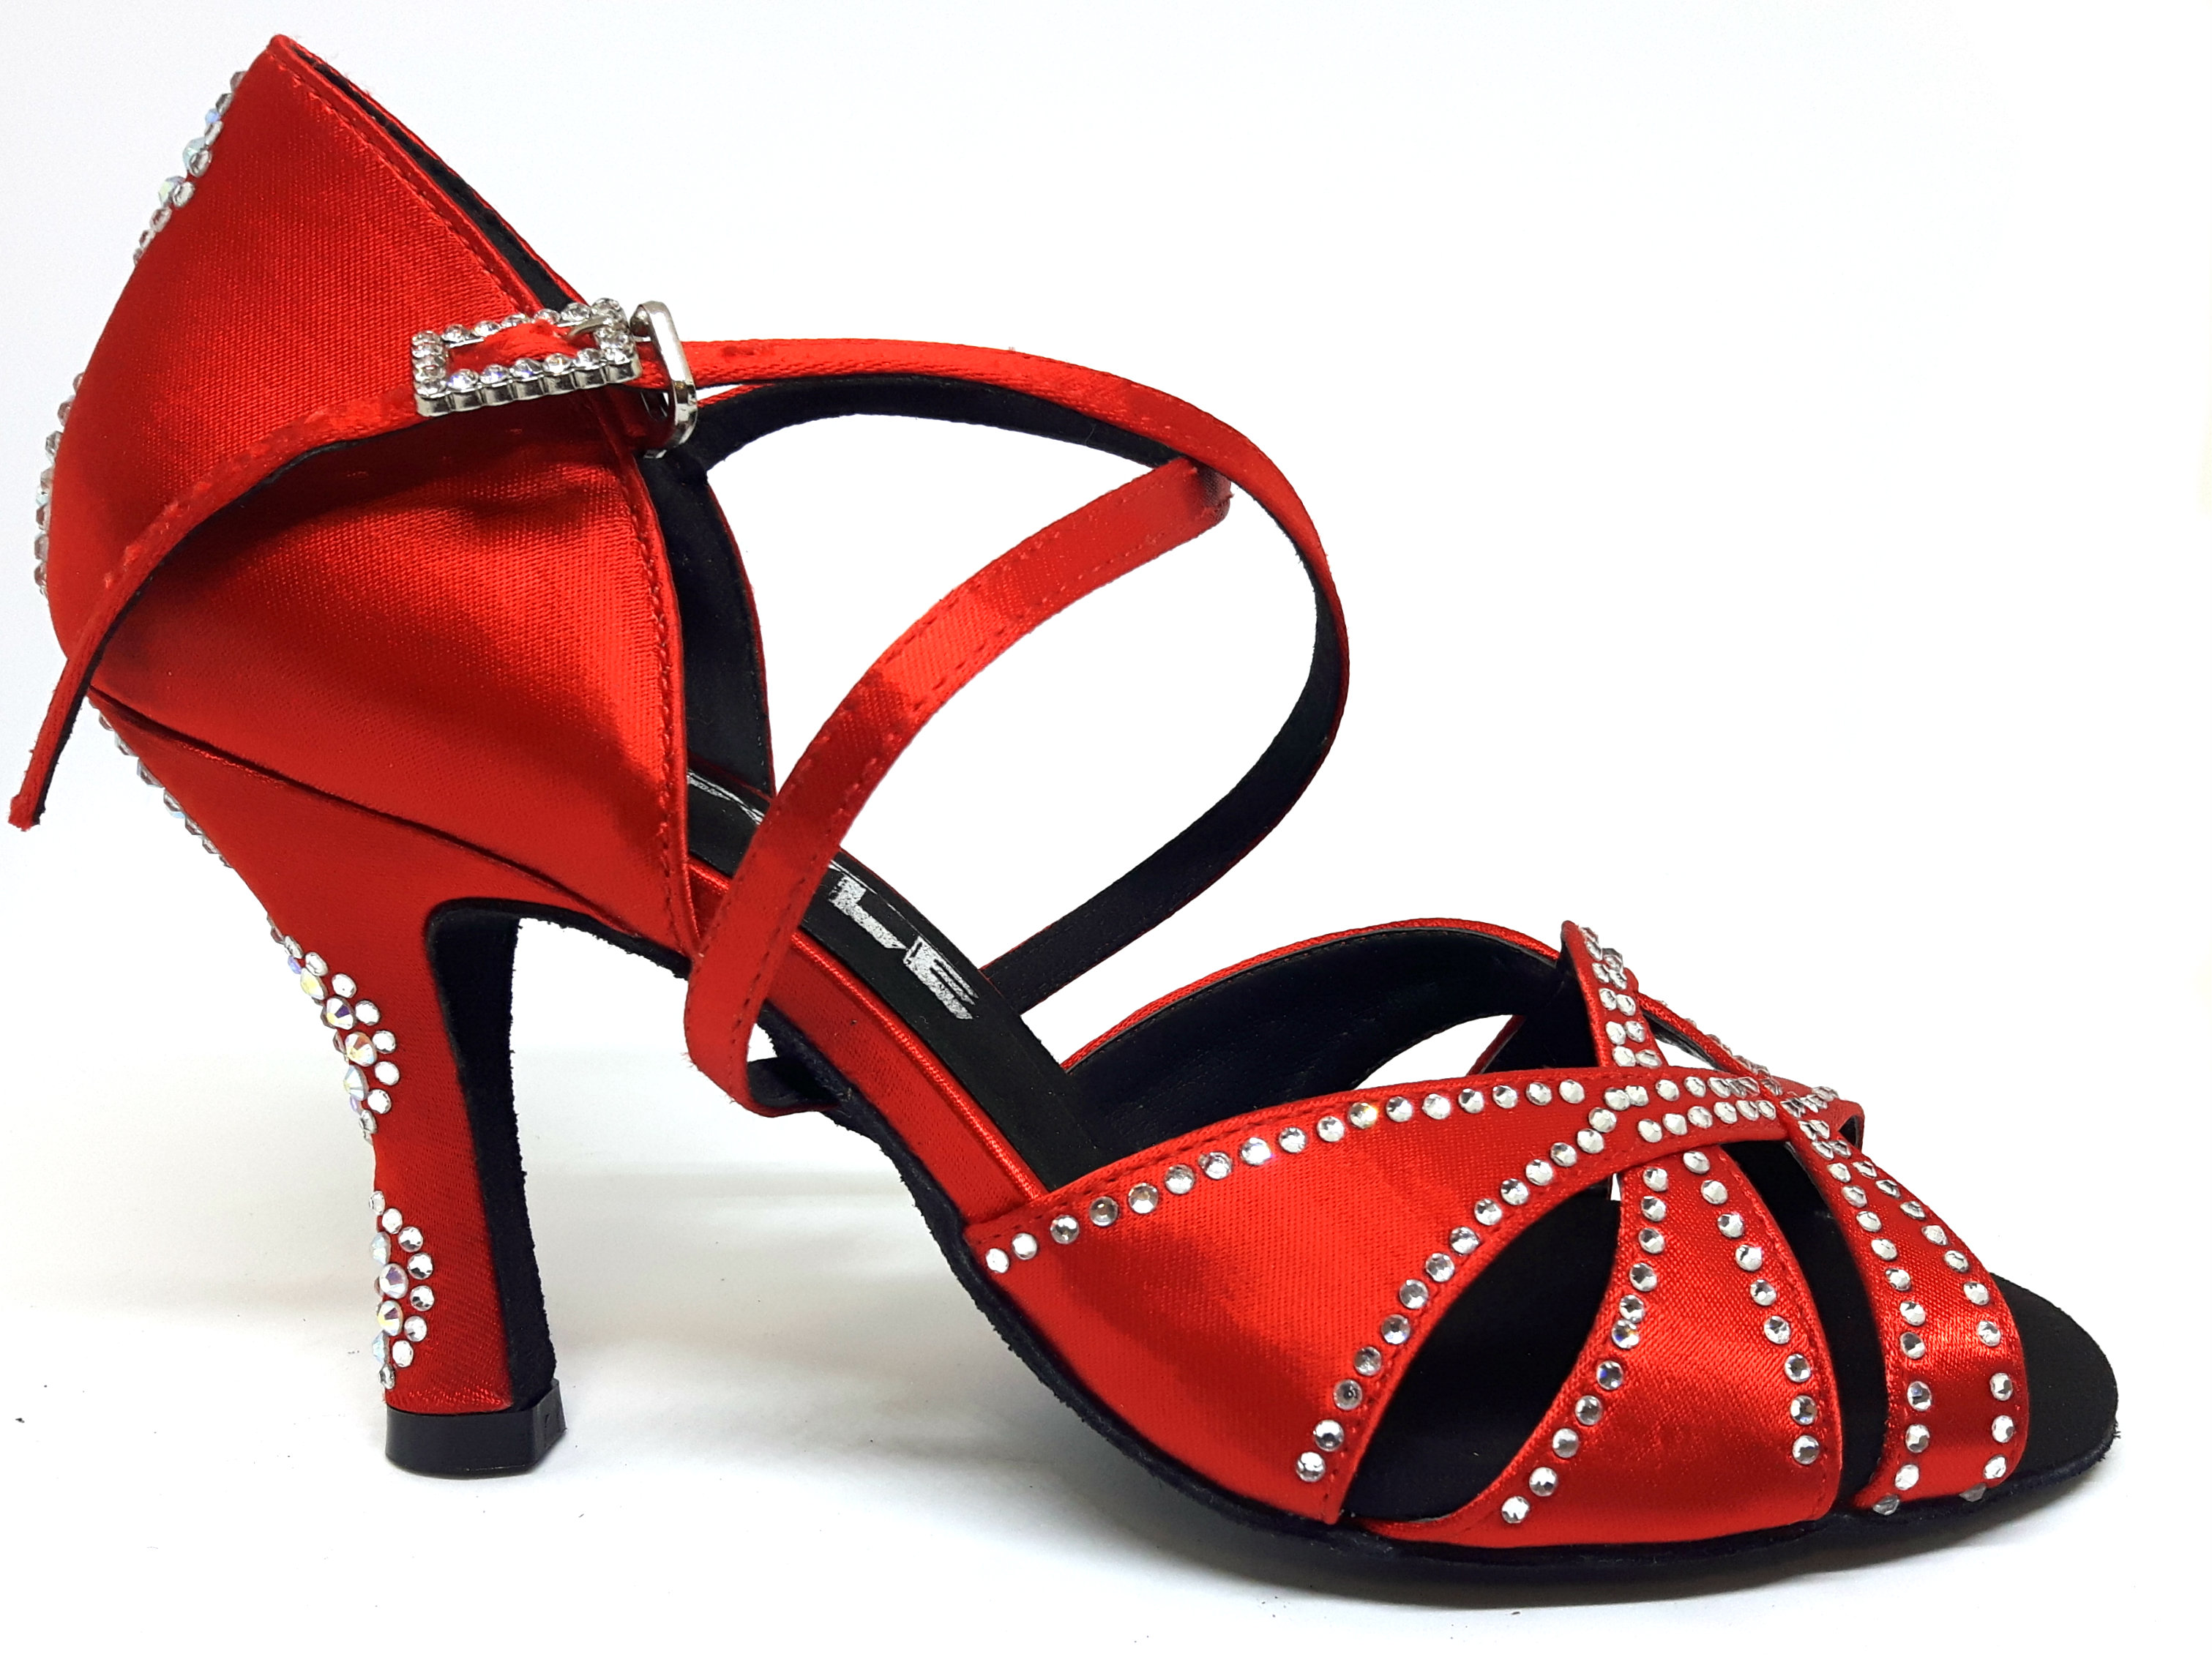 salsa style shoes